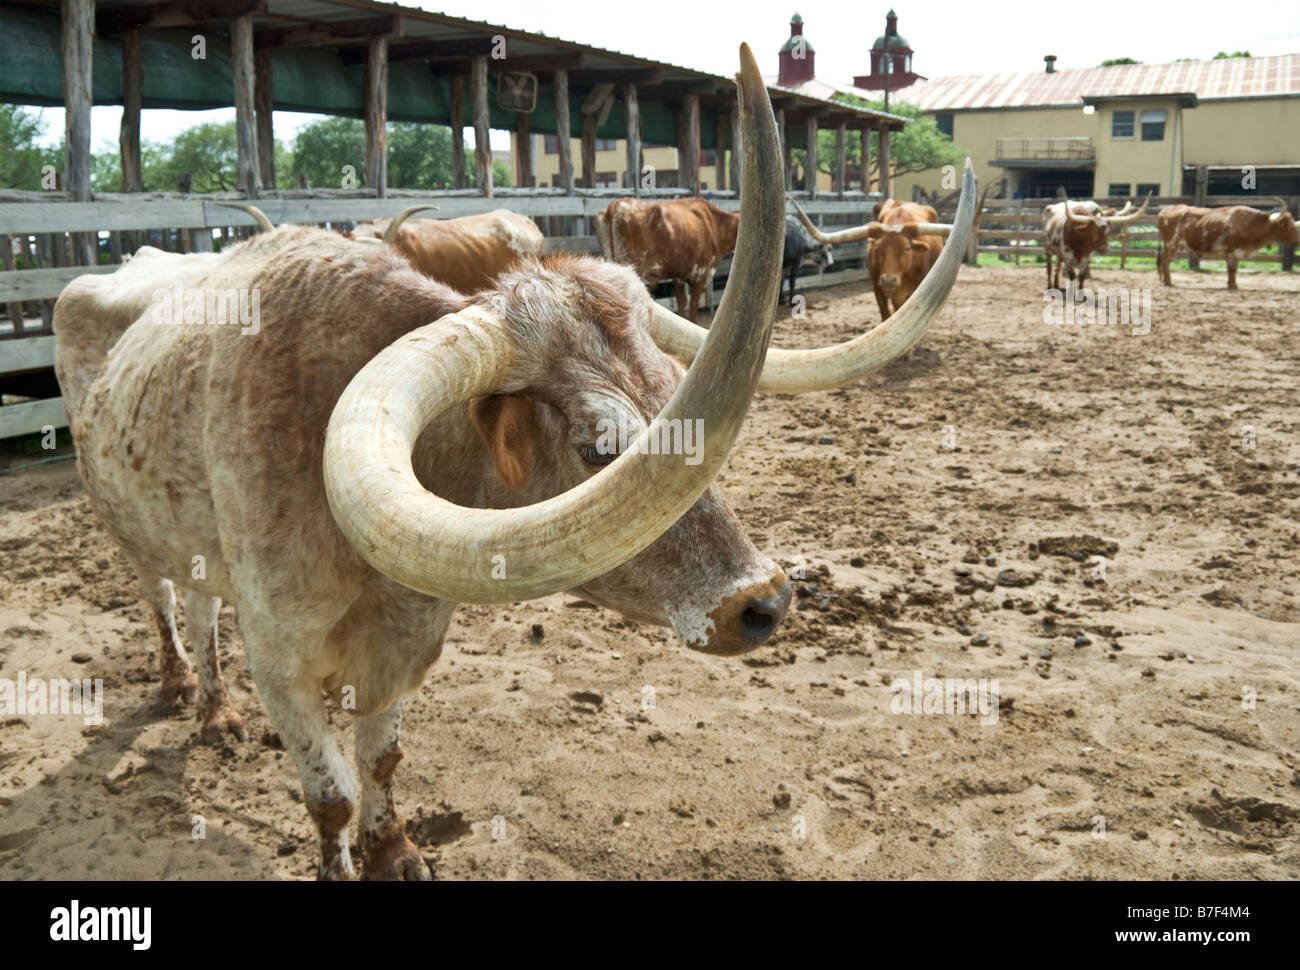 Texas Fort Worth Stockyards National Historic District longhorn cattle used for cattle drive tourist attraction Stock Photo